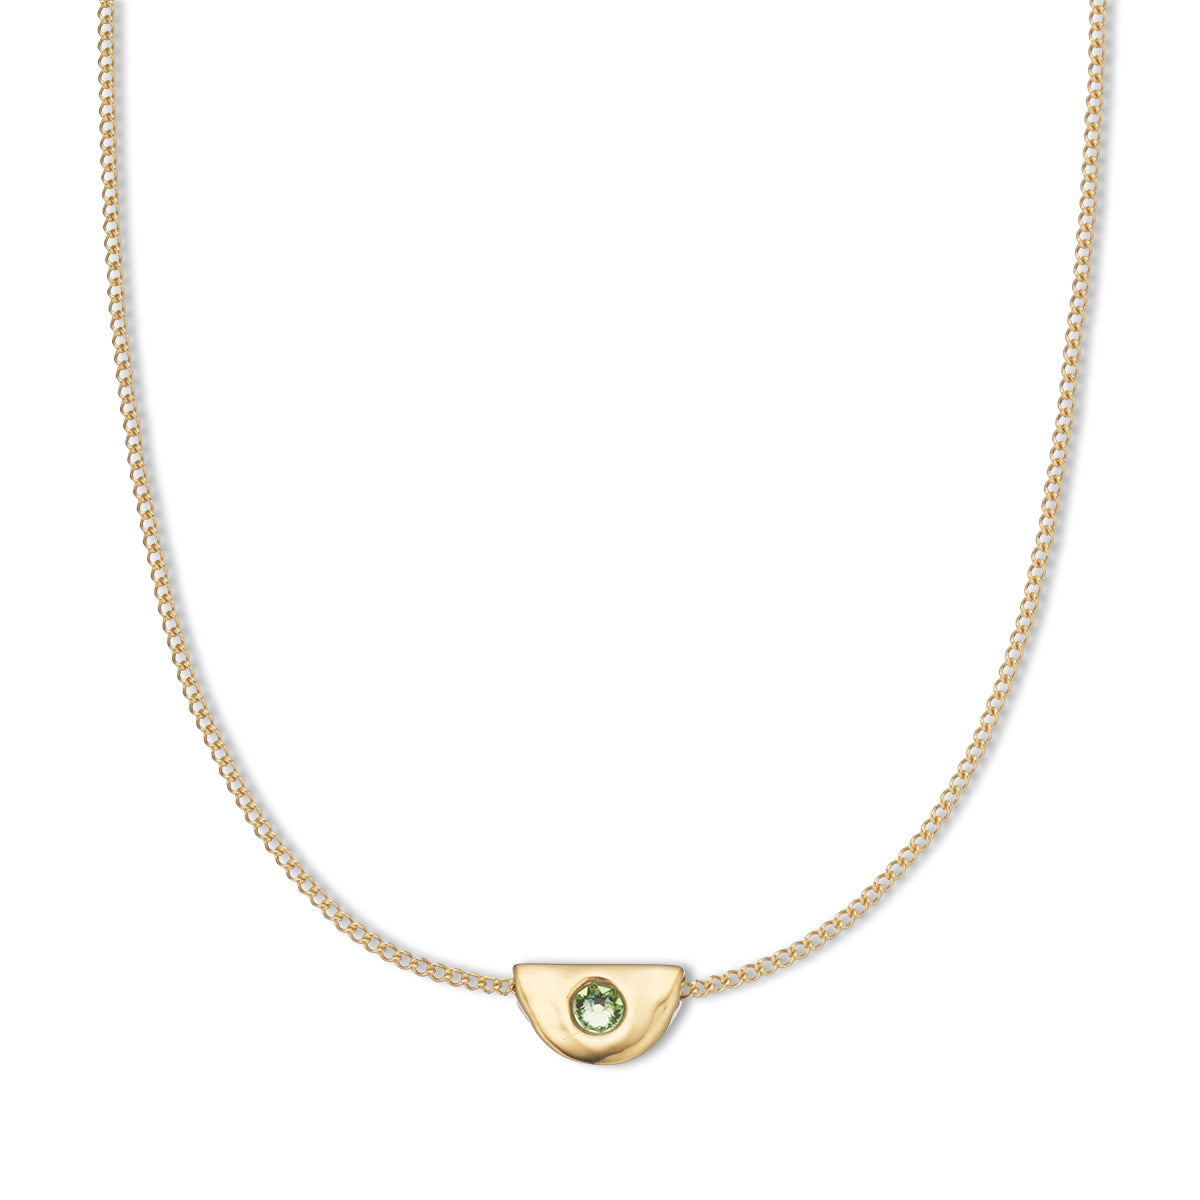 August peridot birthstone necklace 18k gold plated